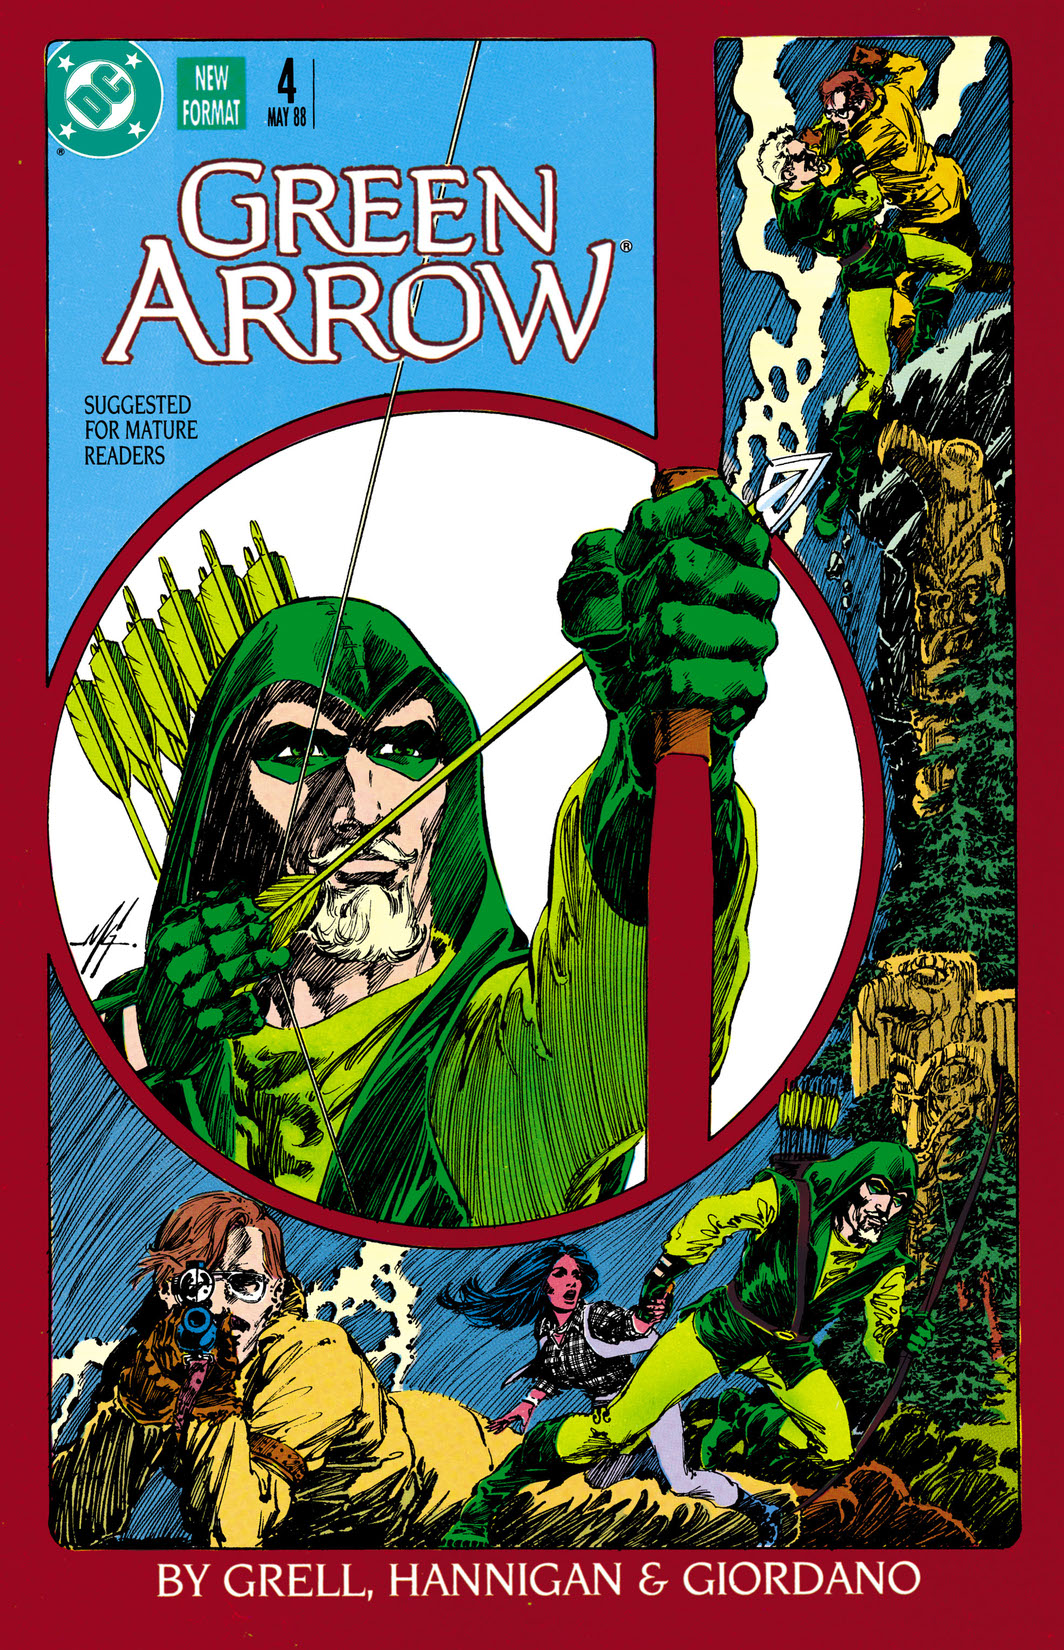 Green Arrow (1987-) #4 preview images